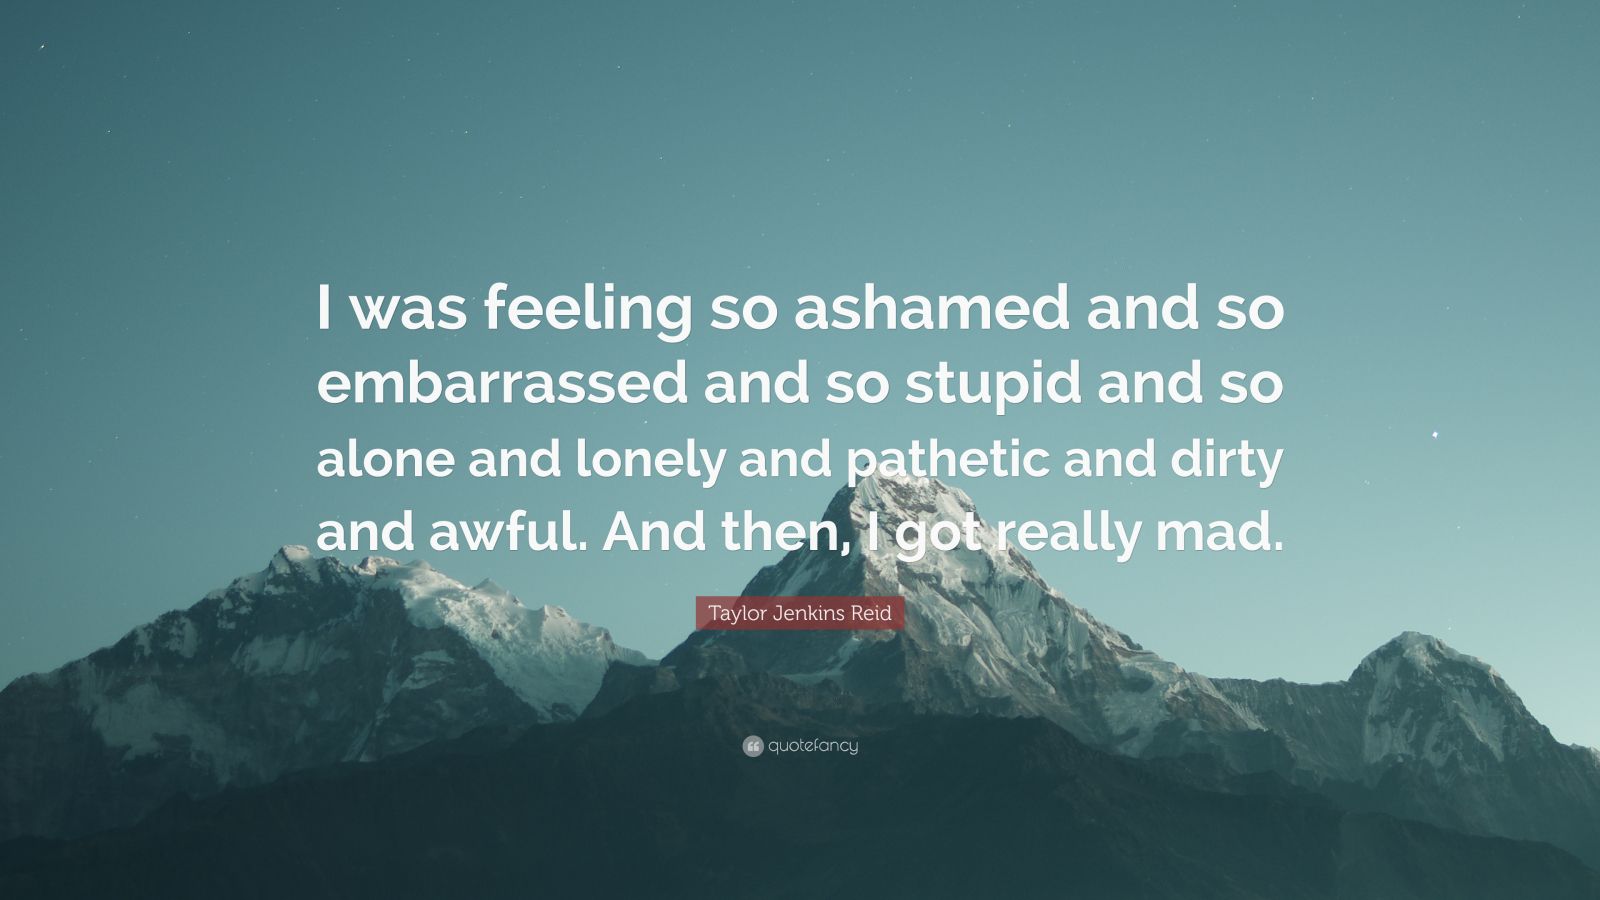 Taylor Jenkins Reid Quote “i Was Feeling So Ashamed And So Embarrassed And So Stupid And So